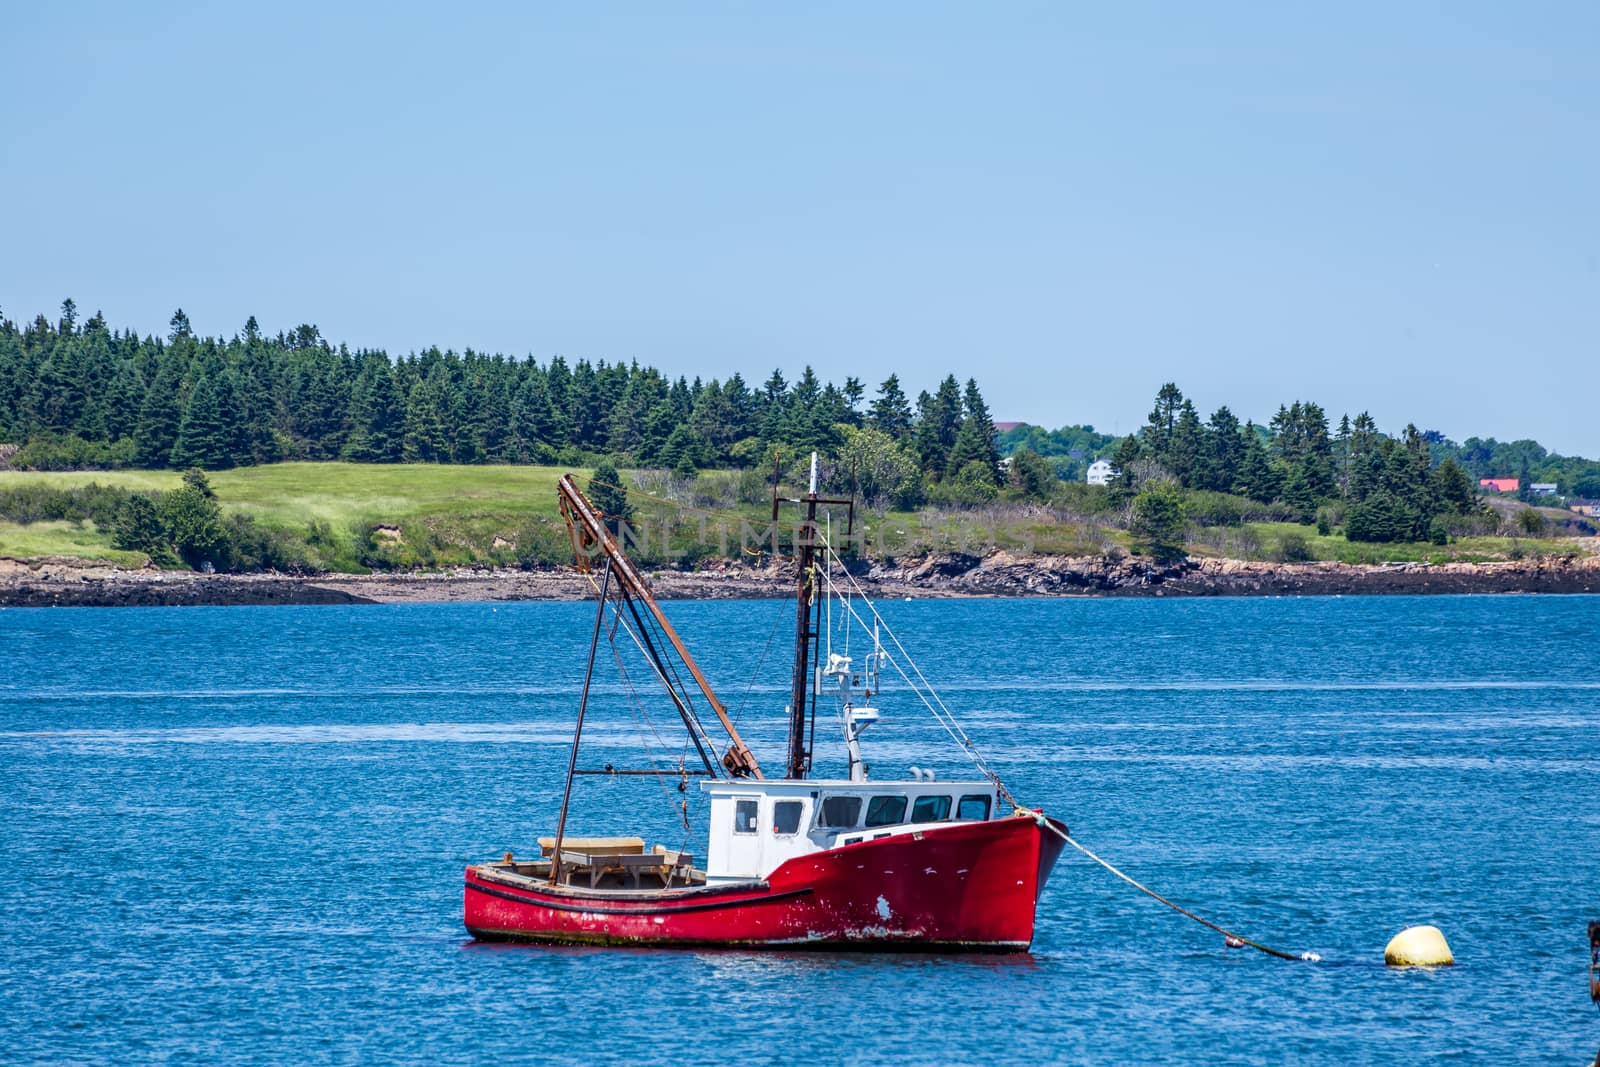 A hard working lobster boat lays at anchor in a small harbor in the Down East region of Maine.